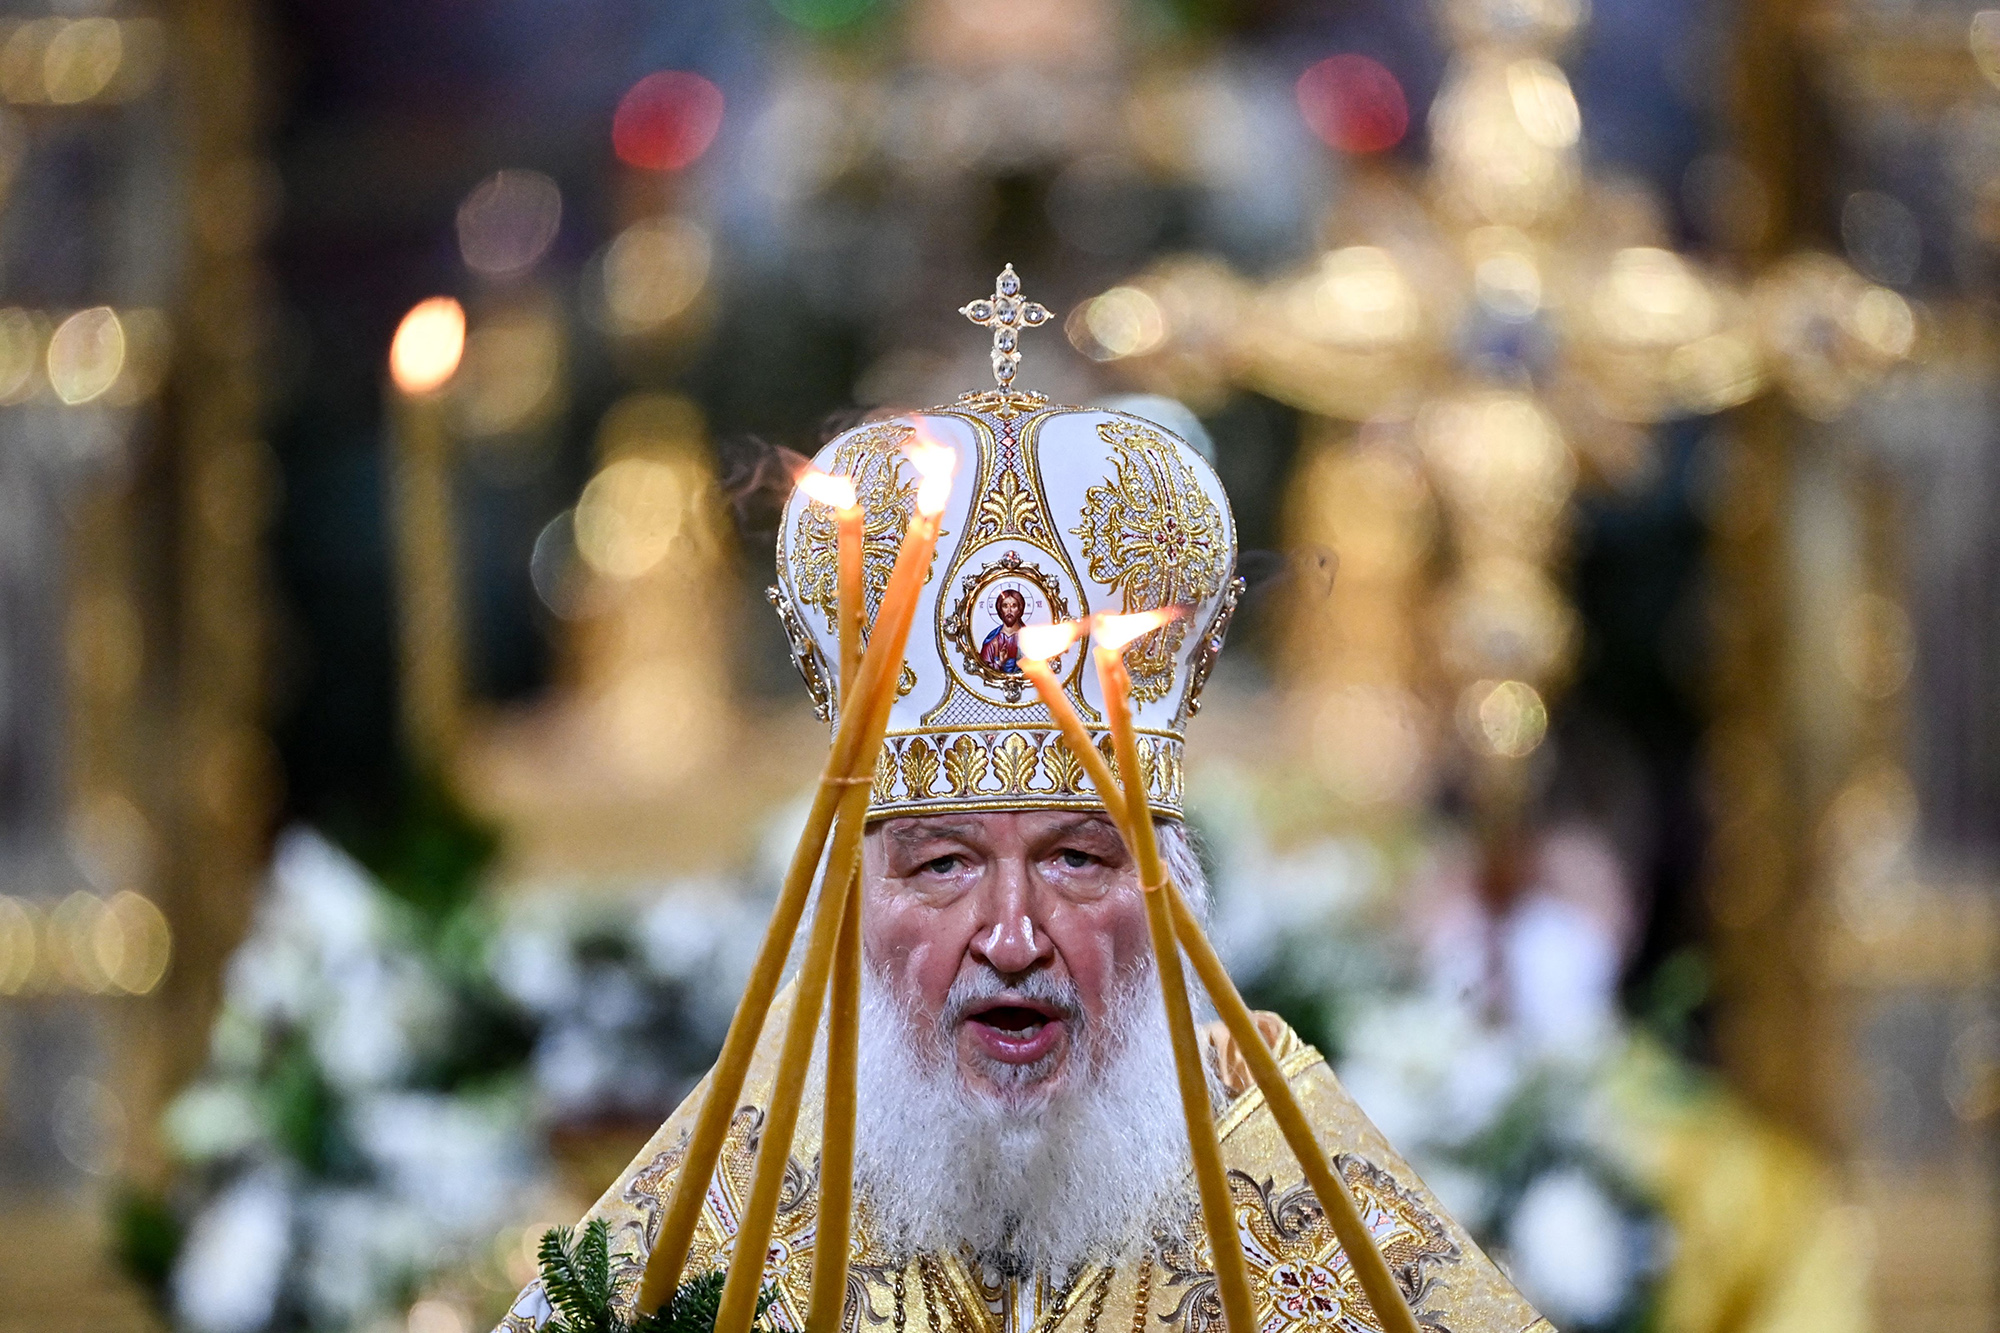 Russian Patriarch Kirill celebrates a Christmas service at the Christ the Savior cathedral in Moscow, Russia, on January 6.